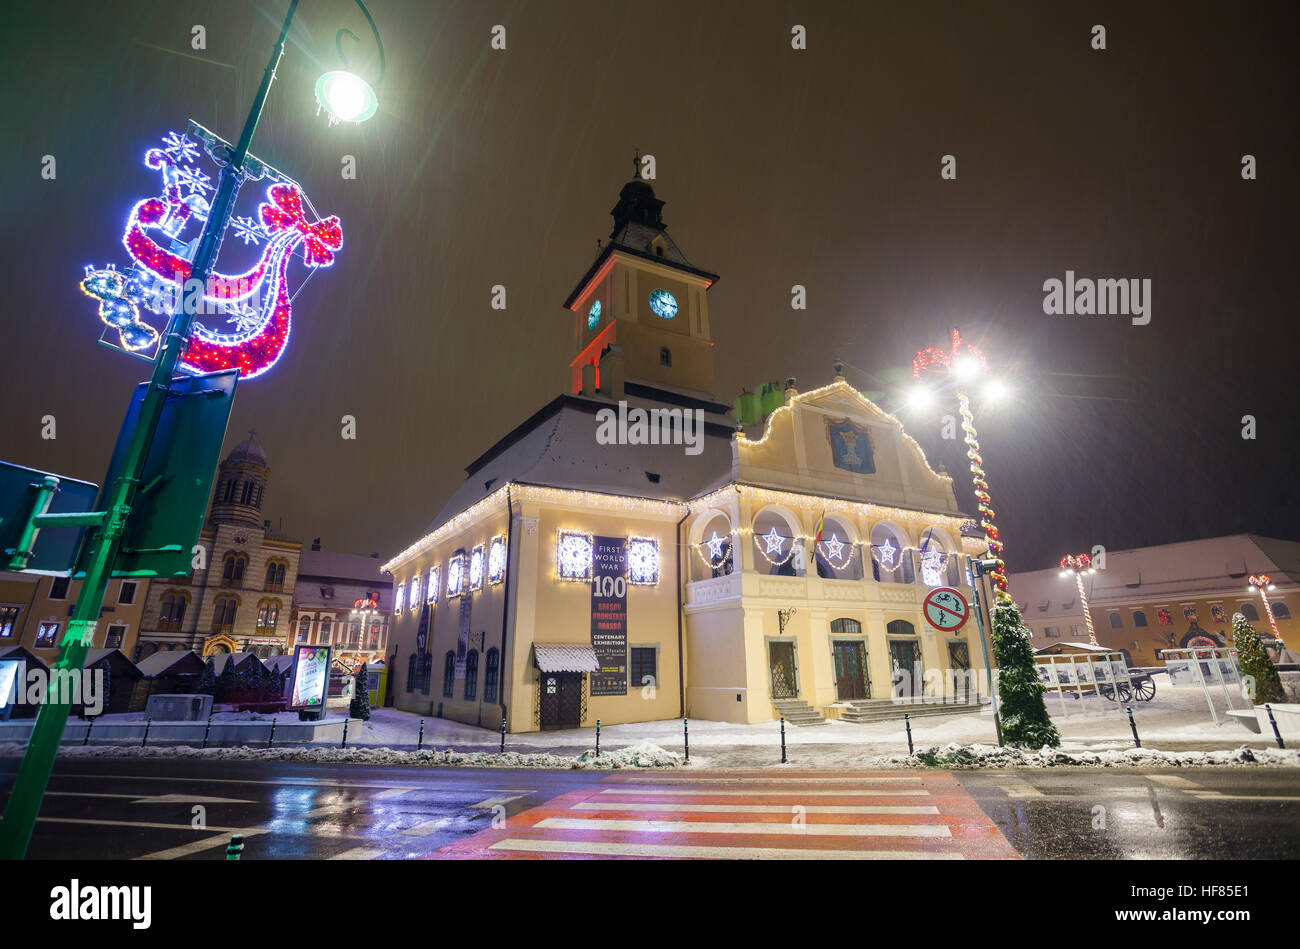 BRASOV, ROMANIA - 15 DECEMBER 2016: Brasov Council House night view decorated for Christmas and traditional winter market in the old town center, Roma Stock Photo